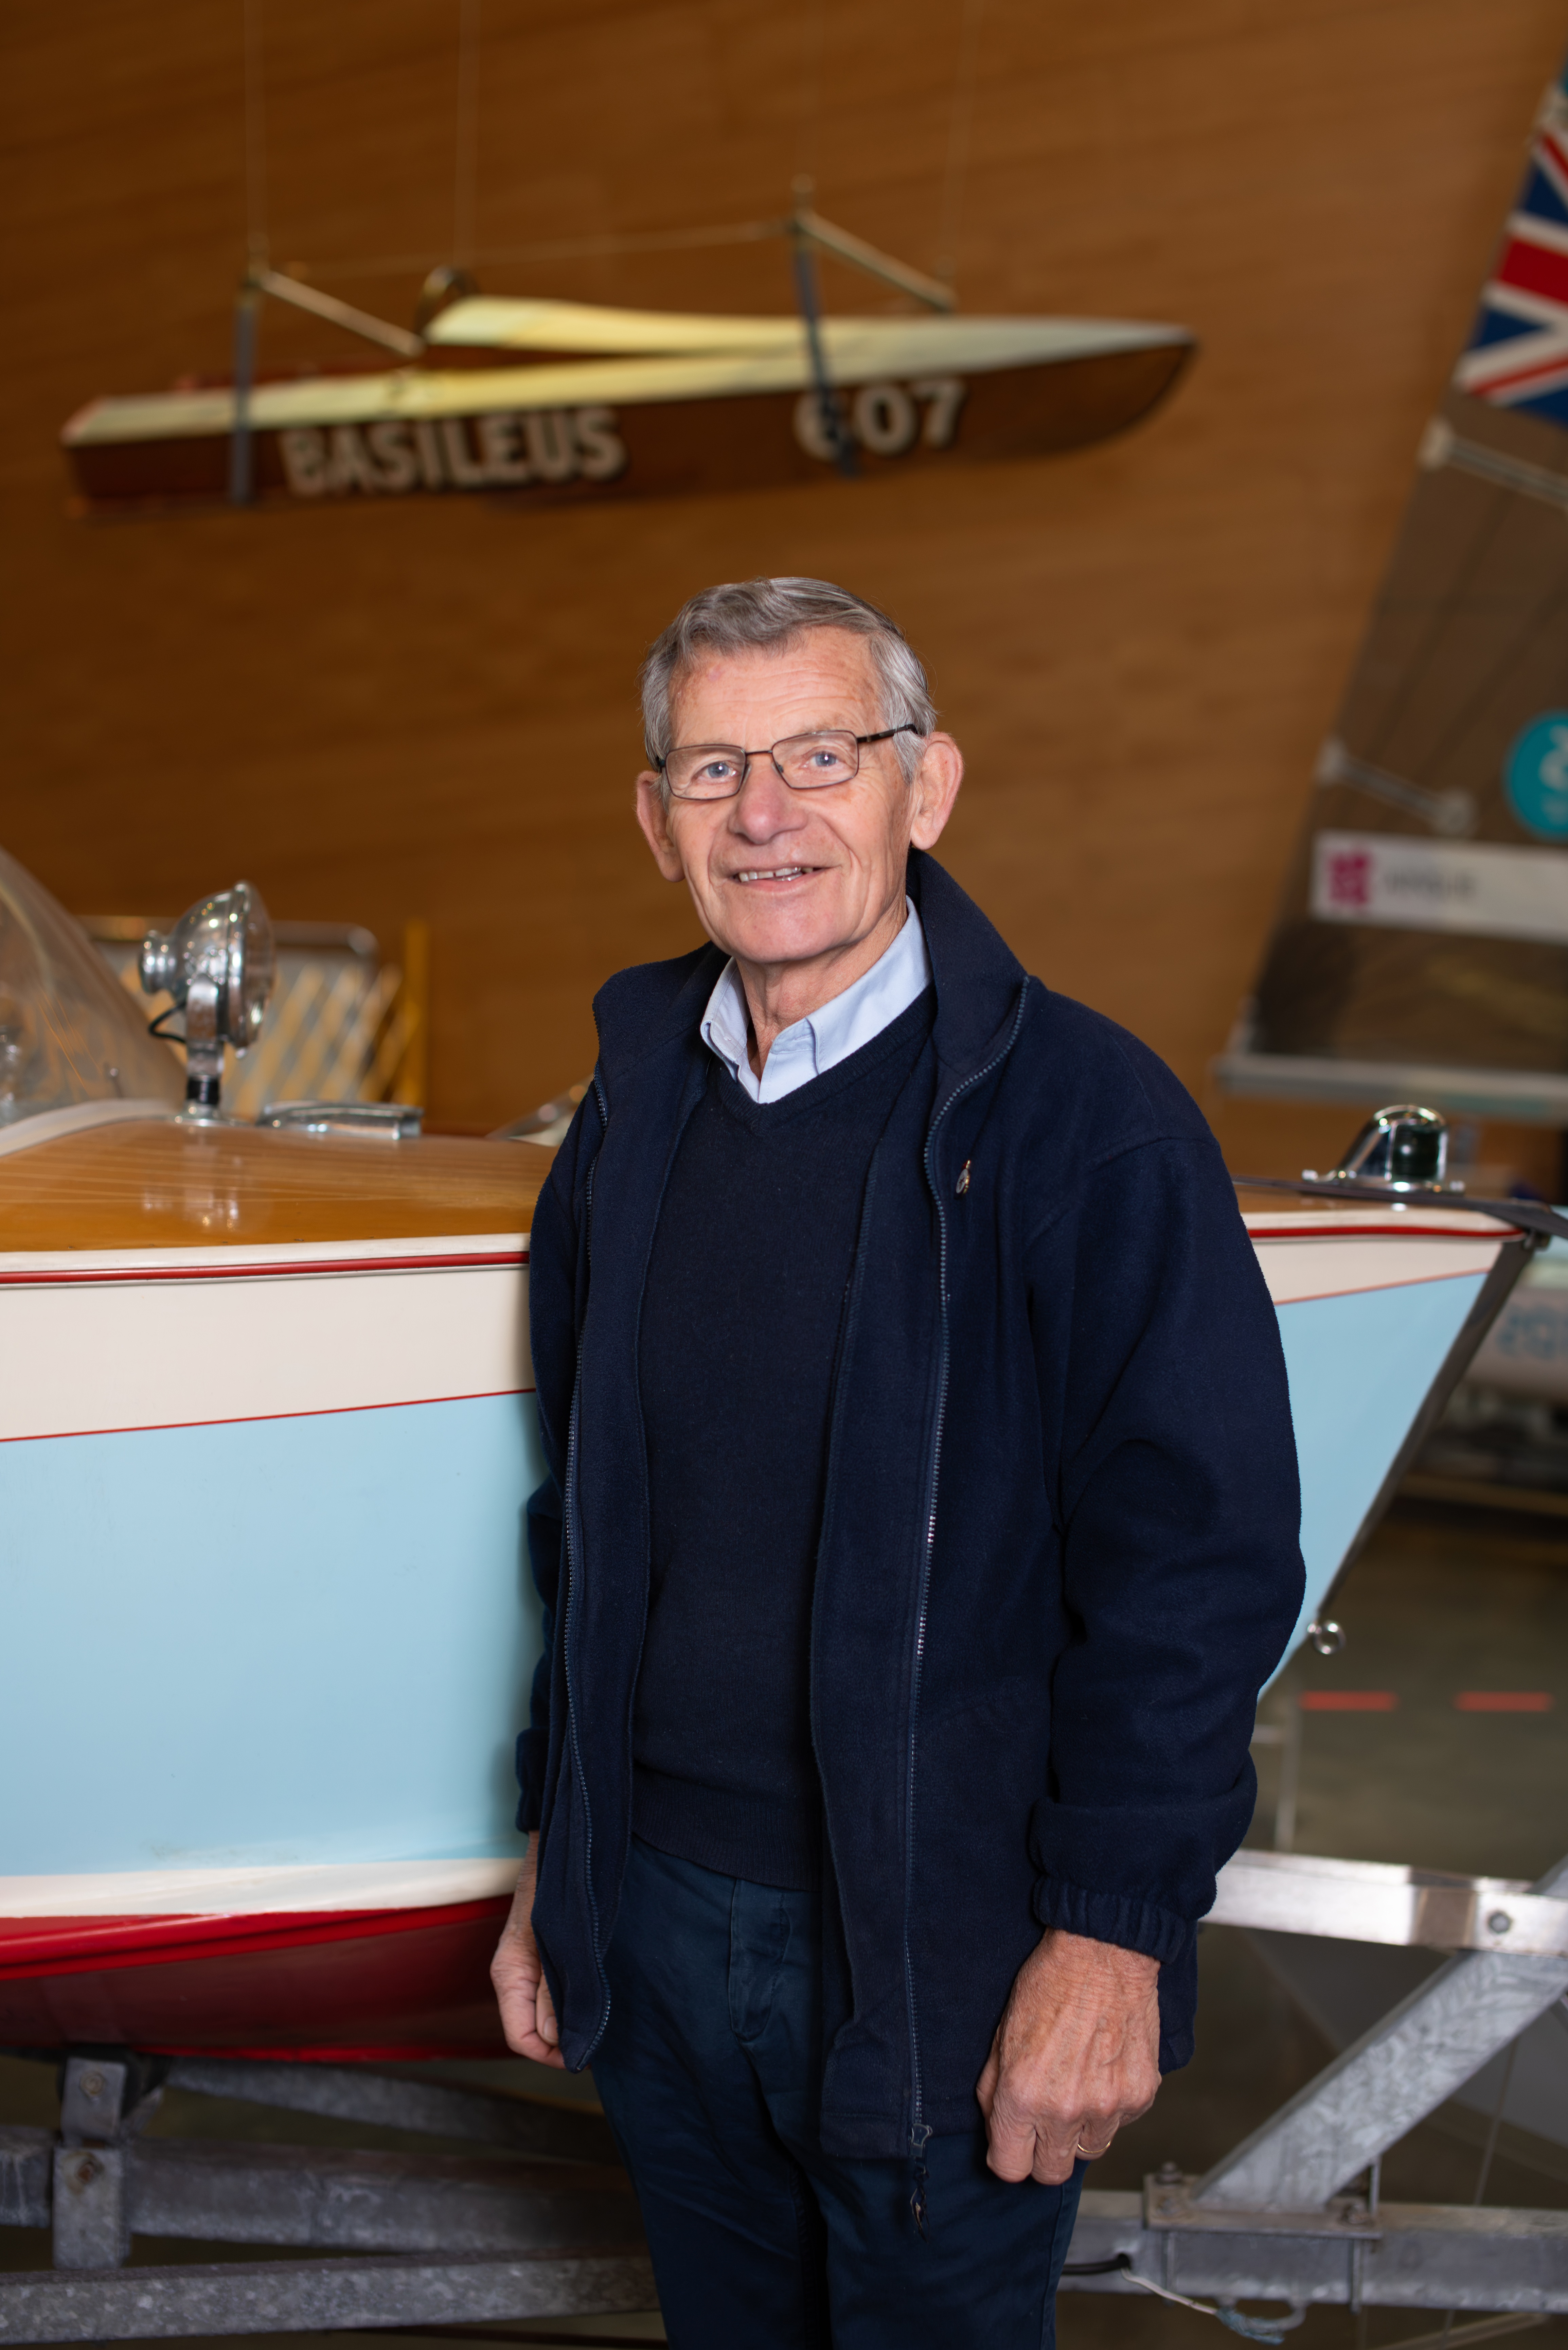 National Maritime Museum Cornwall Volunteer stood next to an exhibit boat in the Boat Hall